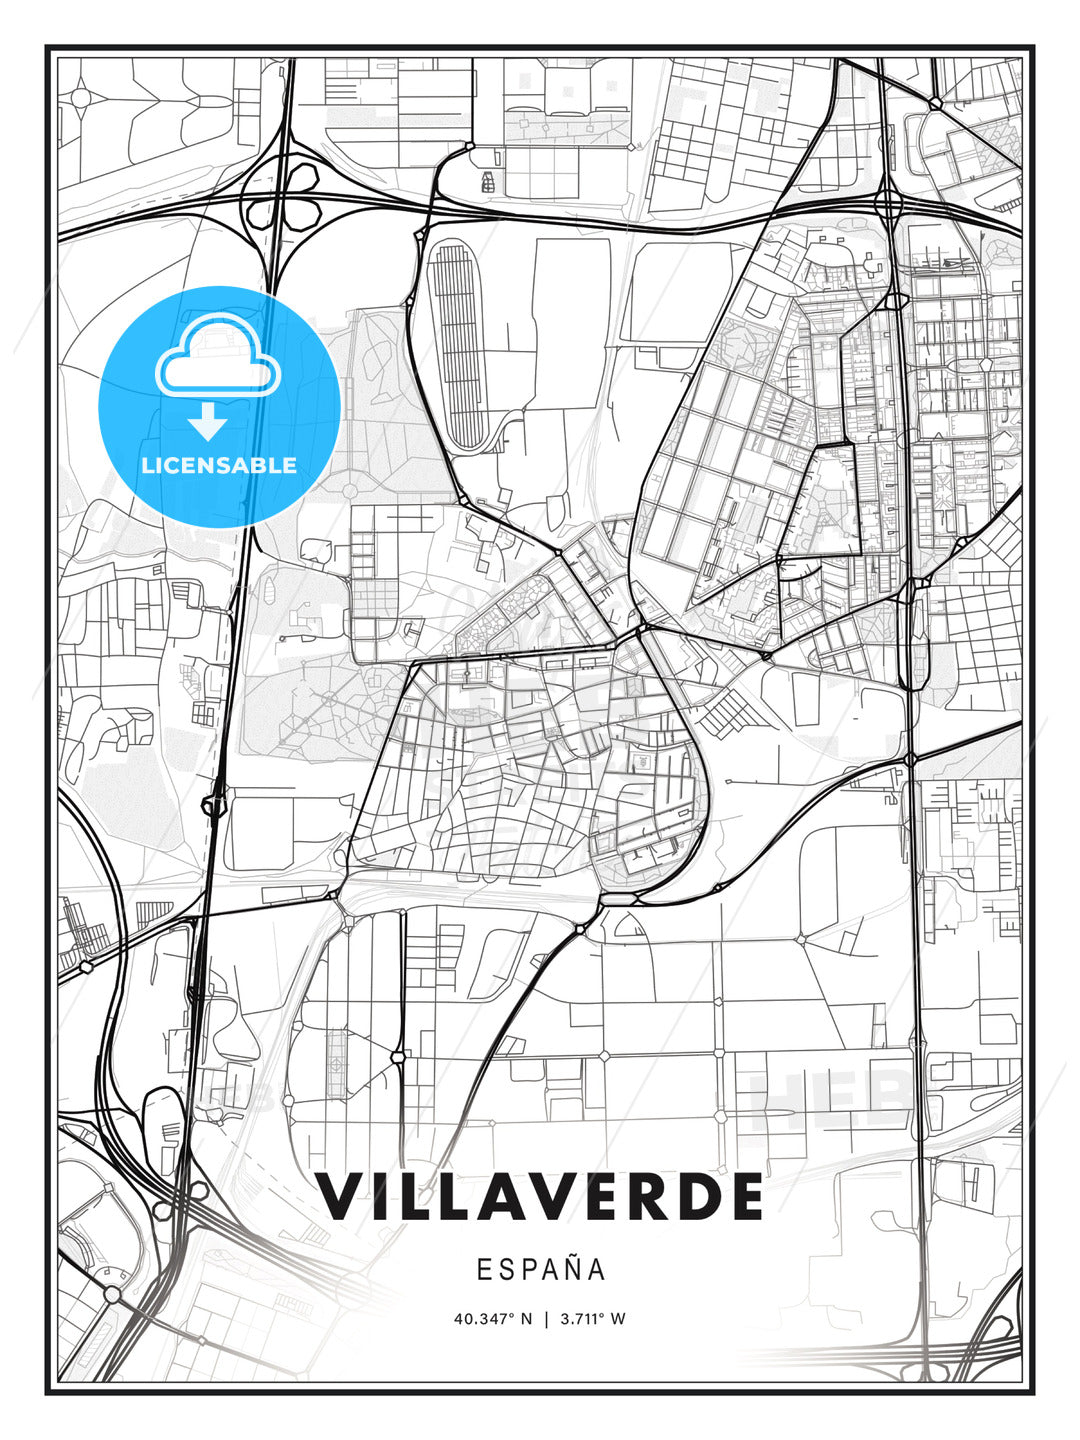 Villaverde, Spain, Modern Print Template in Various Formats - HEBSTREITS Sketches